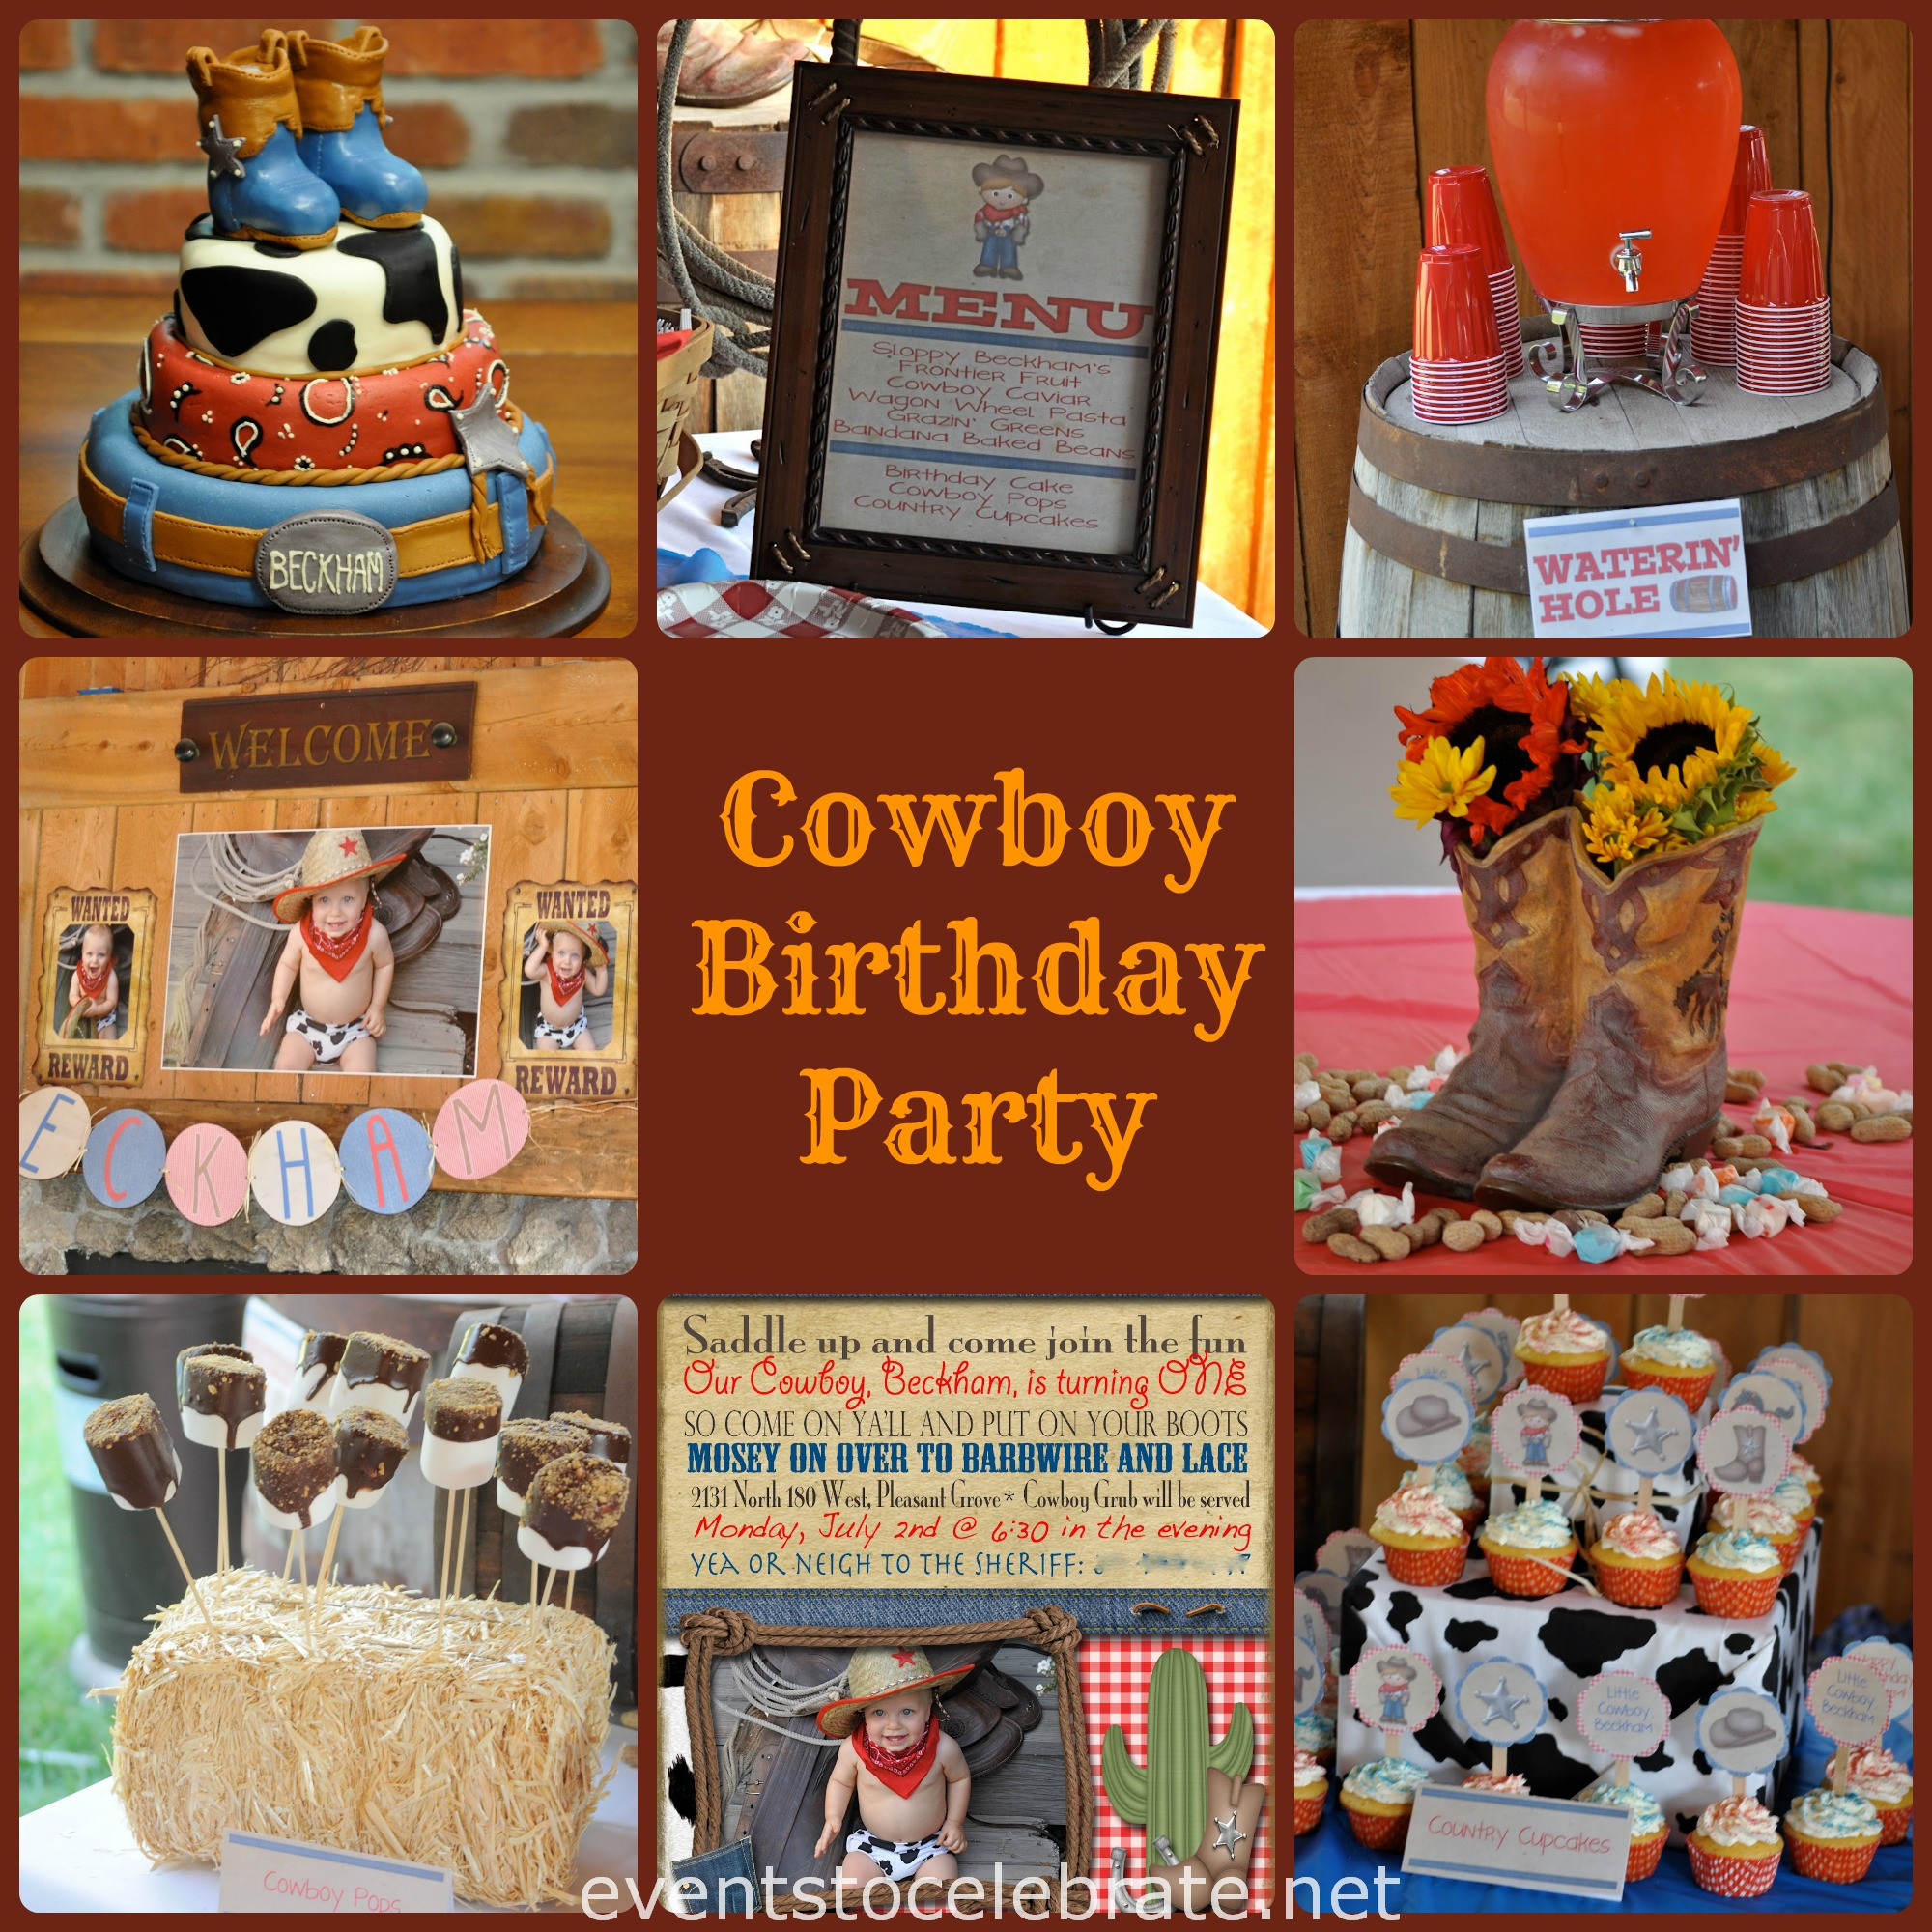 Cowboy Birthday Party Supplies
 cowboy party decorations Archives events to CELEBRATE